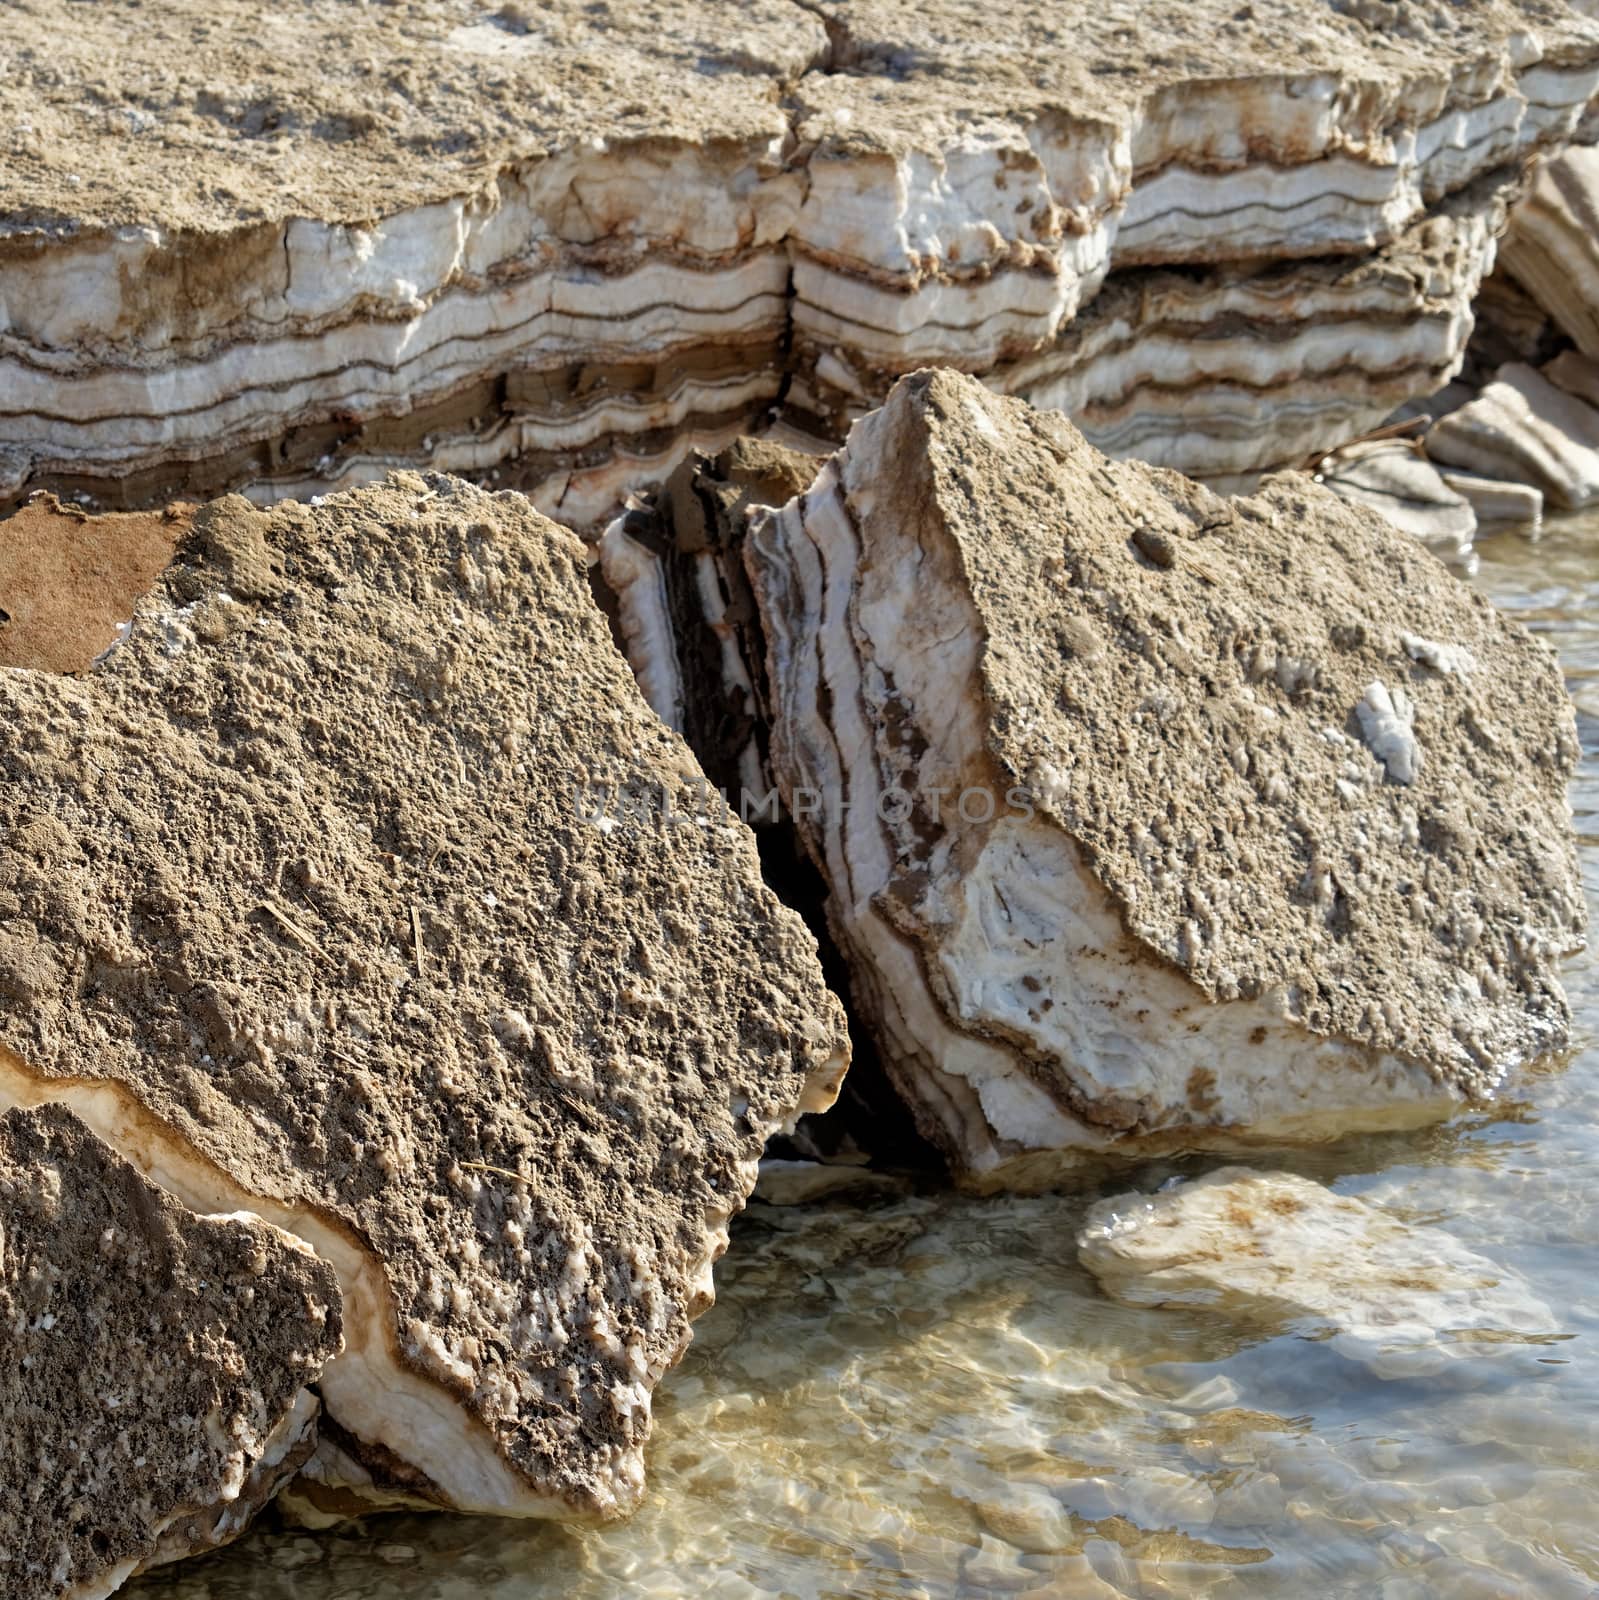 Salt plates with intermediate thin layers of mud on the Dead Sea coast in Jordan, middle east